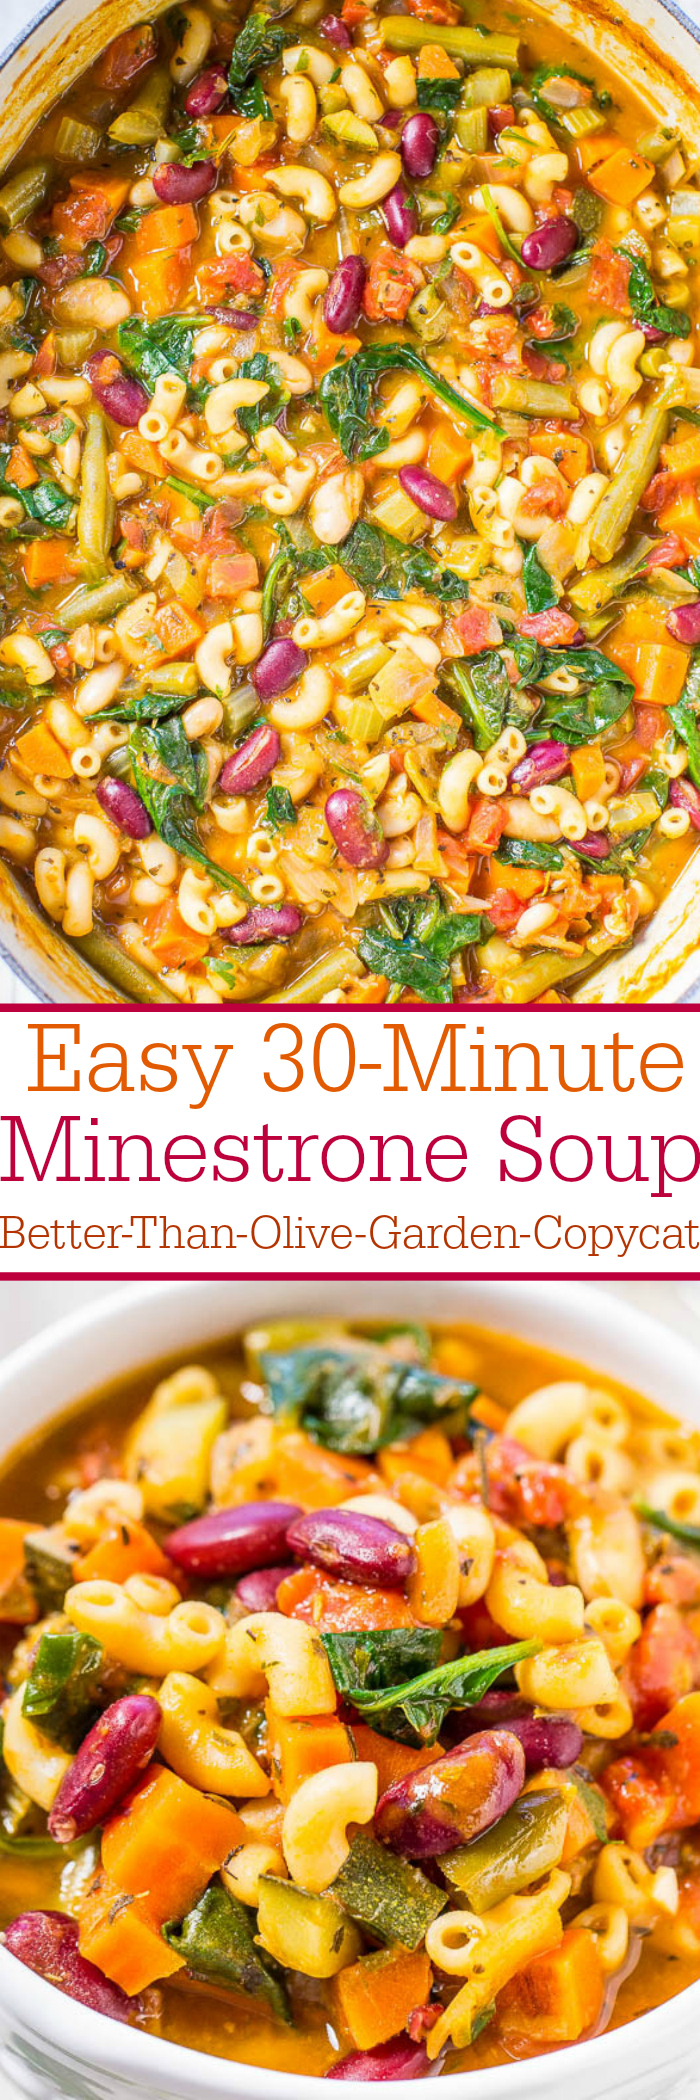 Easy 30-Minute Minestrone Soup (Better-Than-Olive-Garden-Copycat) - Homemade is always better and this soup is amazing!! The best minestrone ever! Perfect for busy weeknights and it's healthy!!